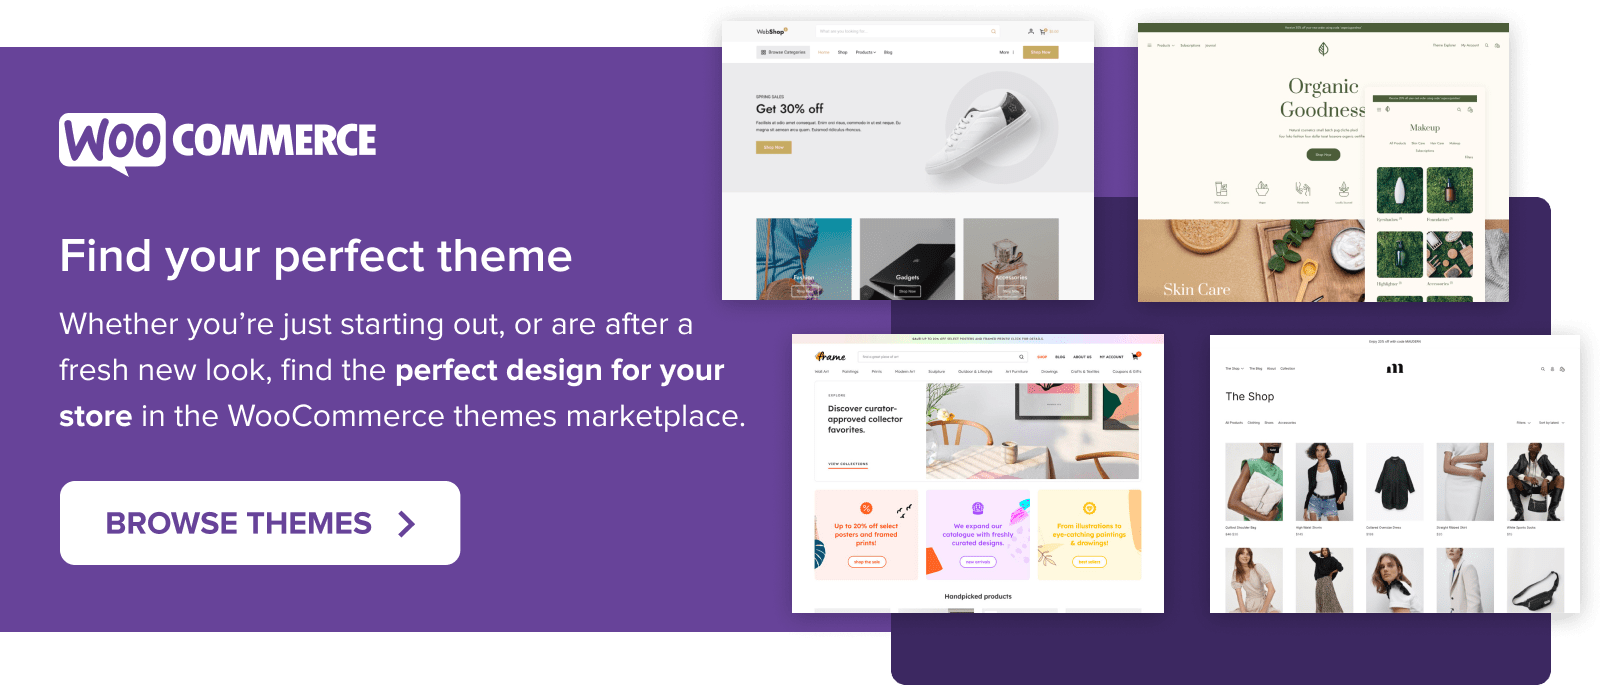 Find the perfect design for your store in the WooCommerce themes marketplace